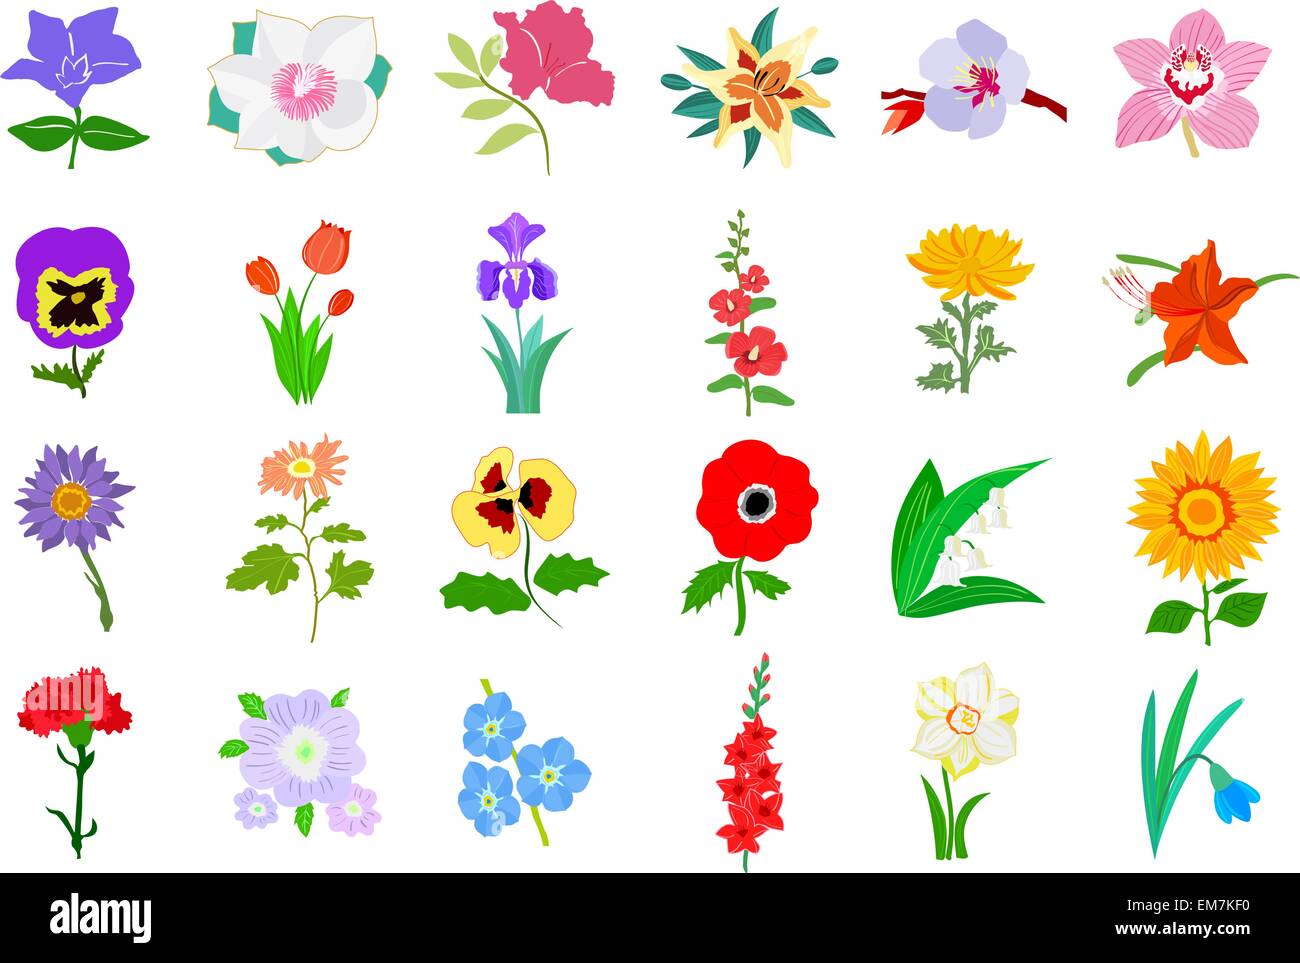 Set of colored illustration of flowers Stock Vector